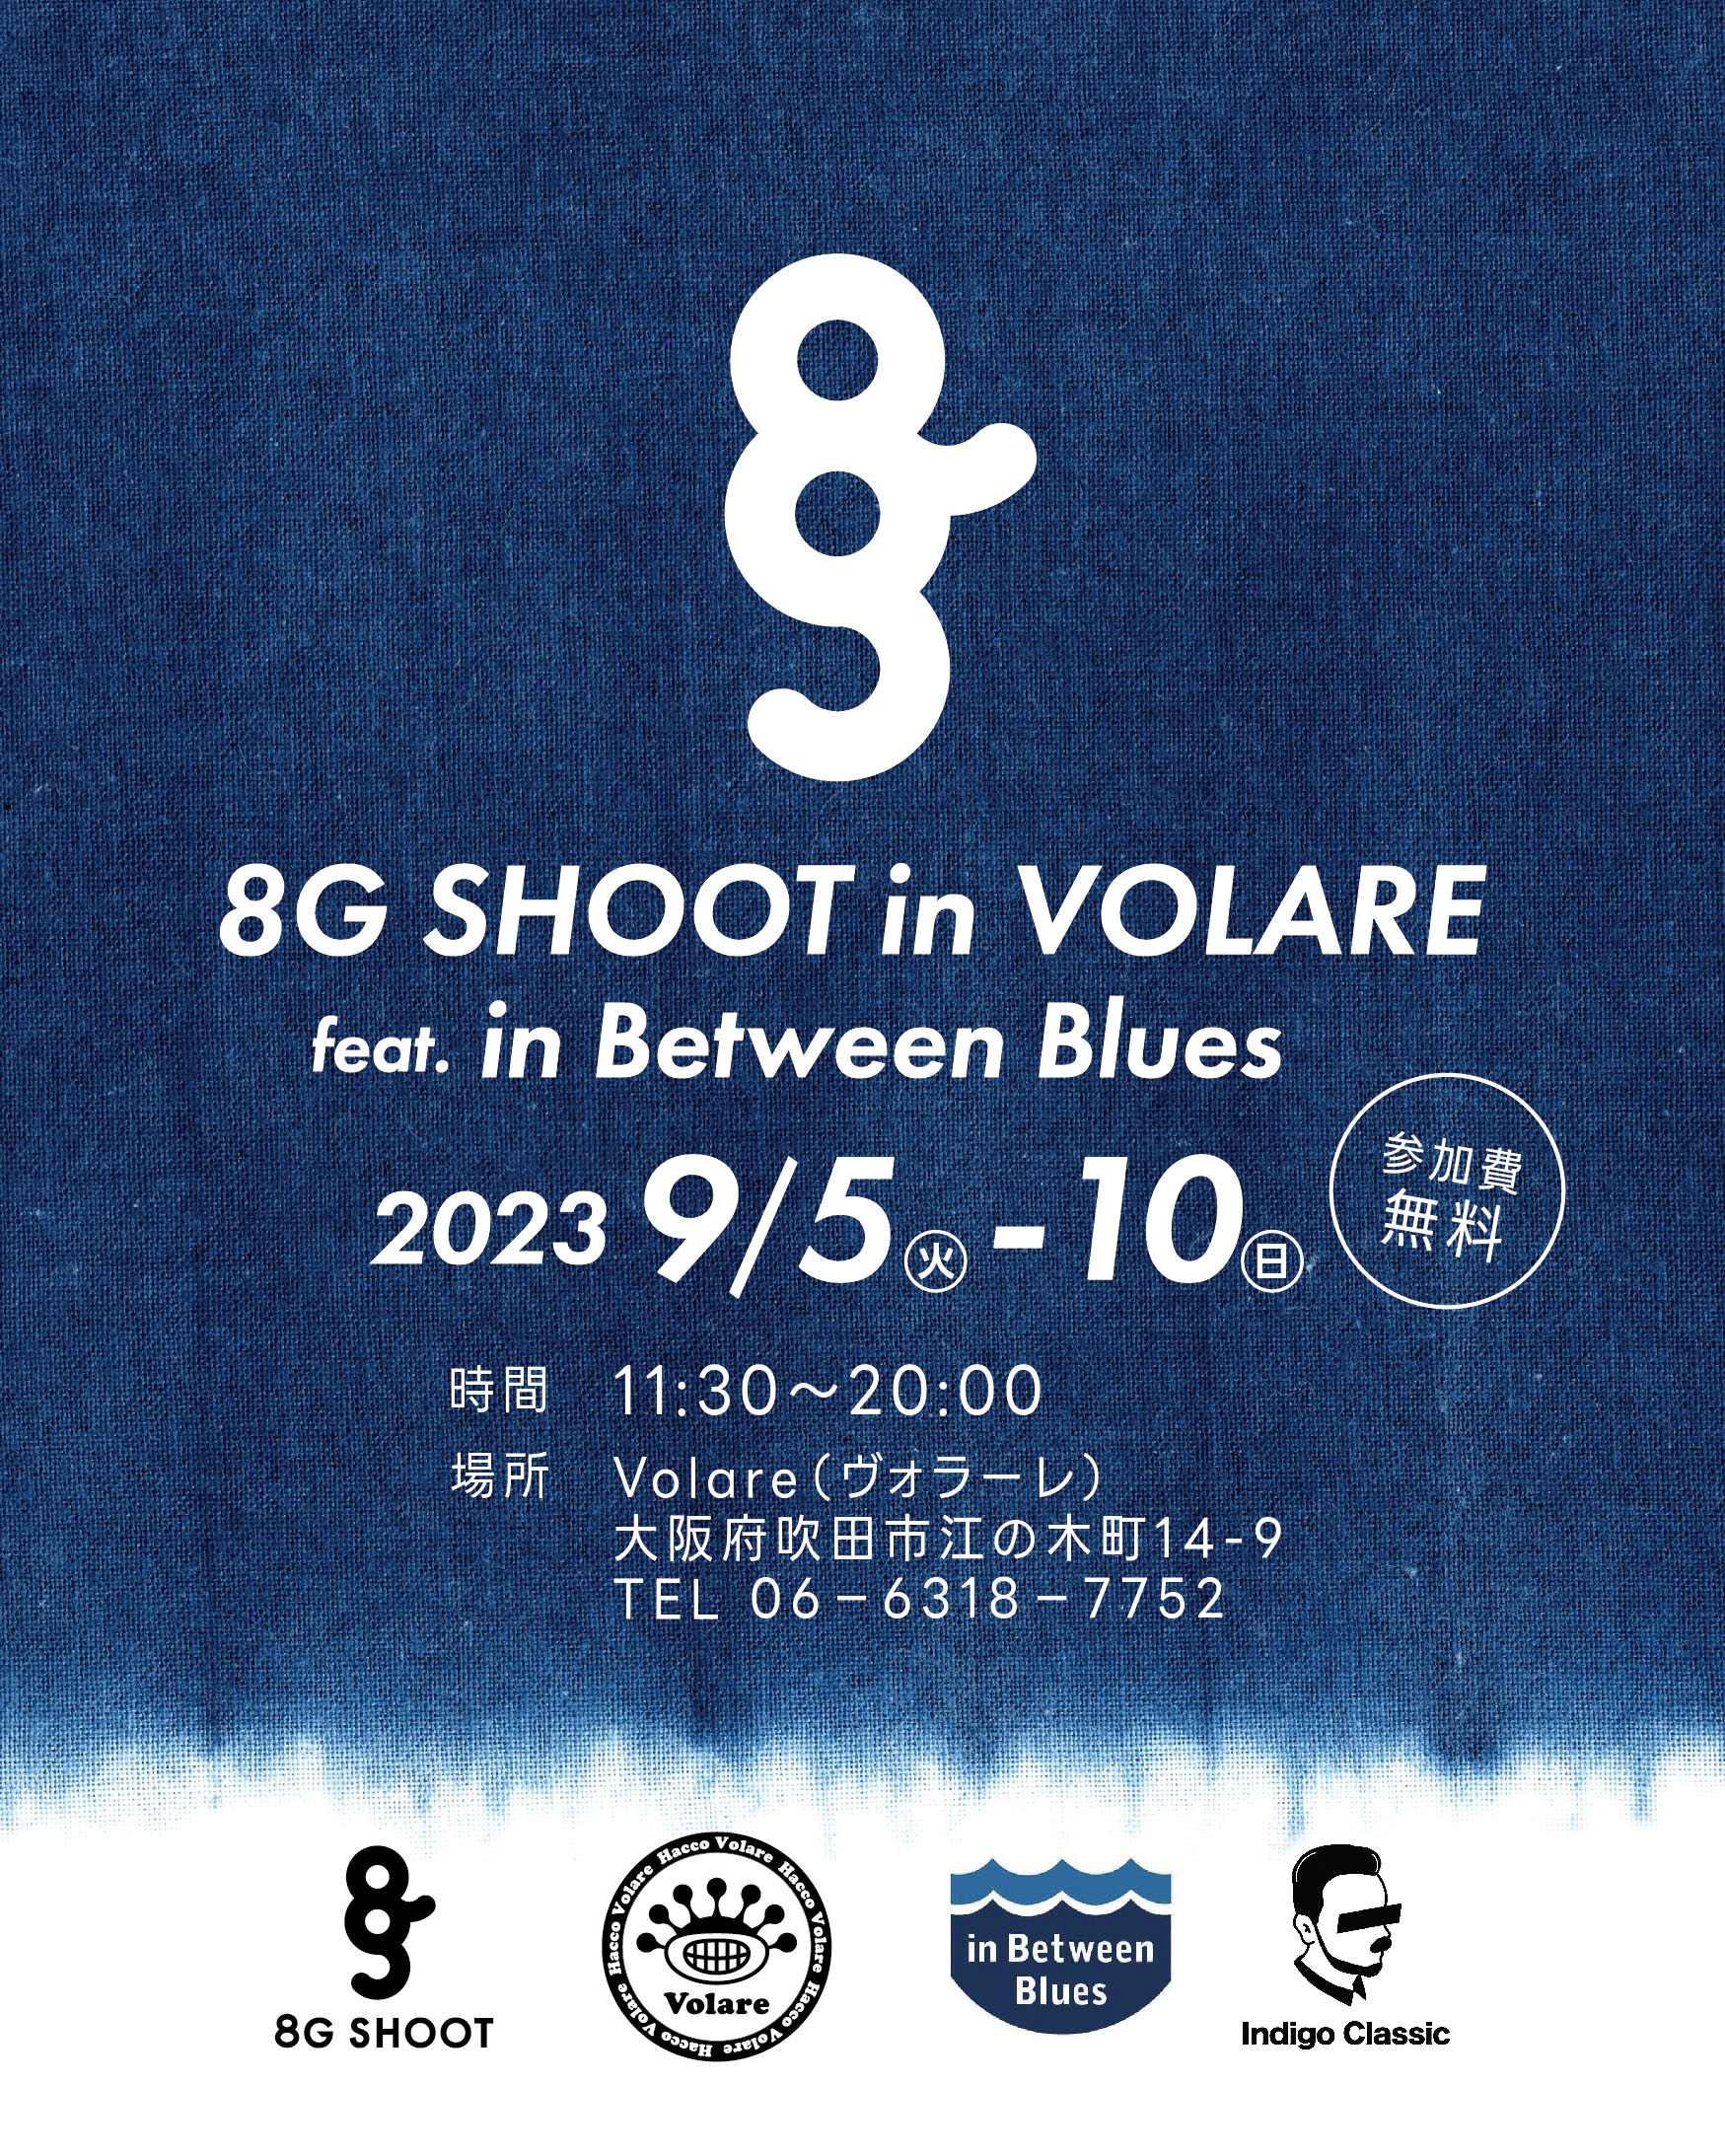 8G SHOOT in VOLARE feat. in Between Blues